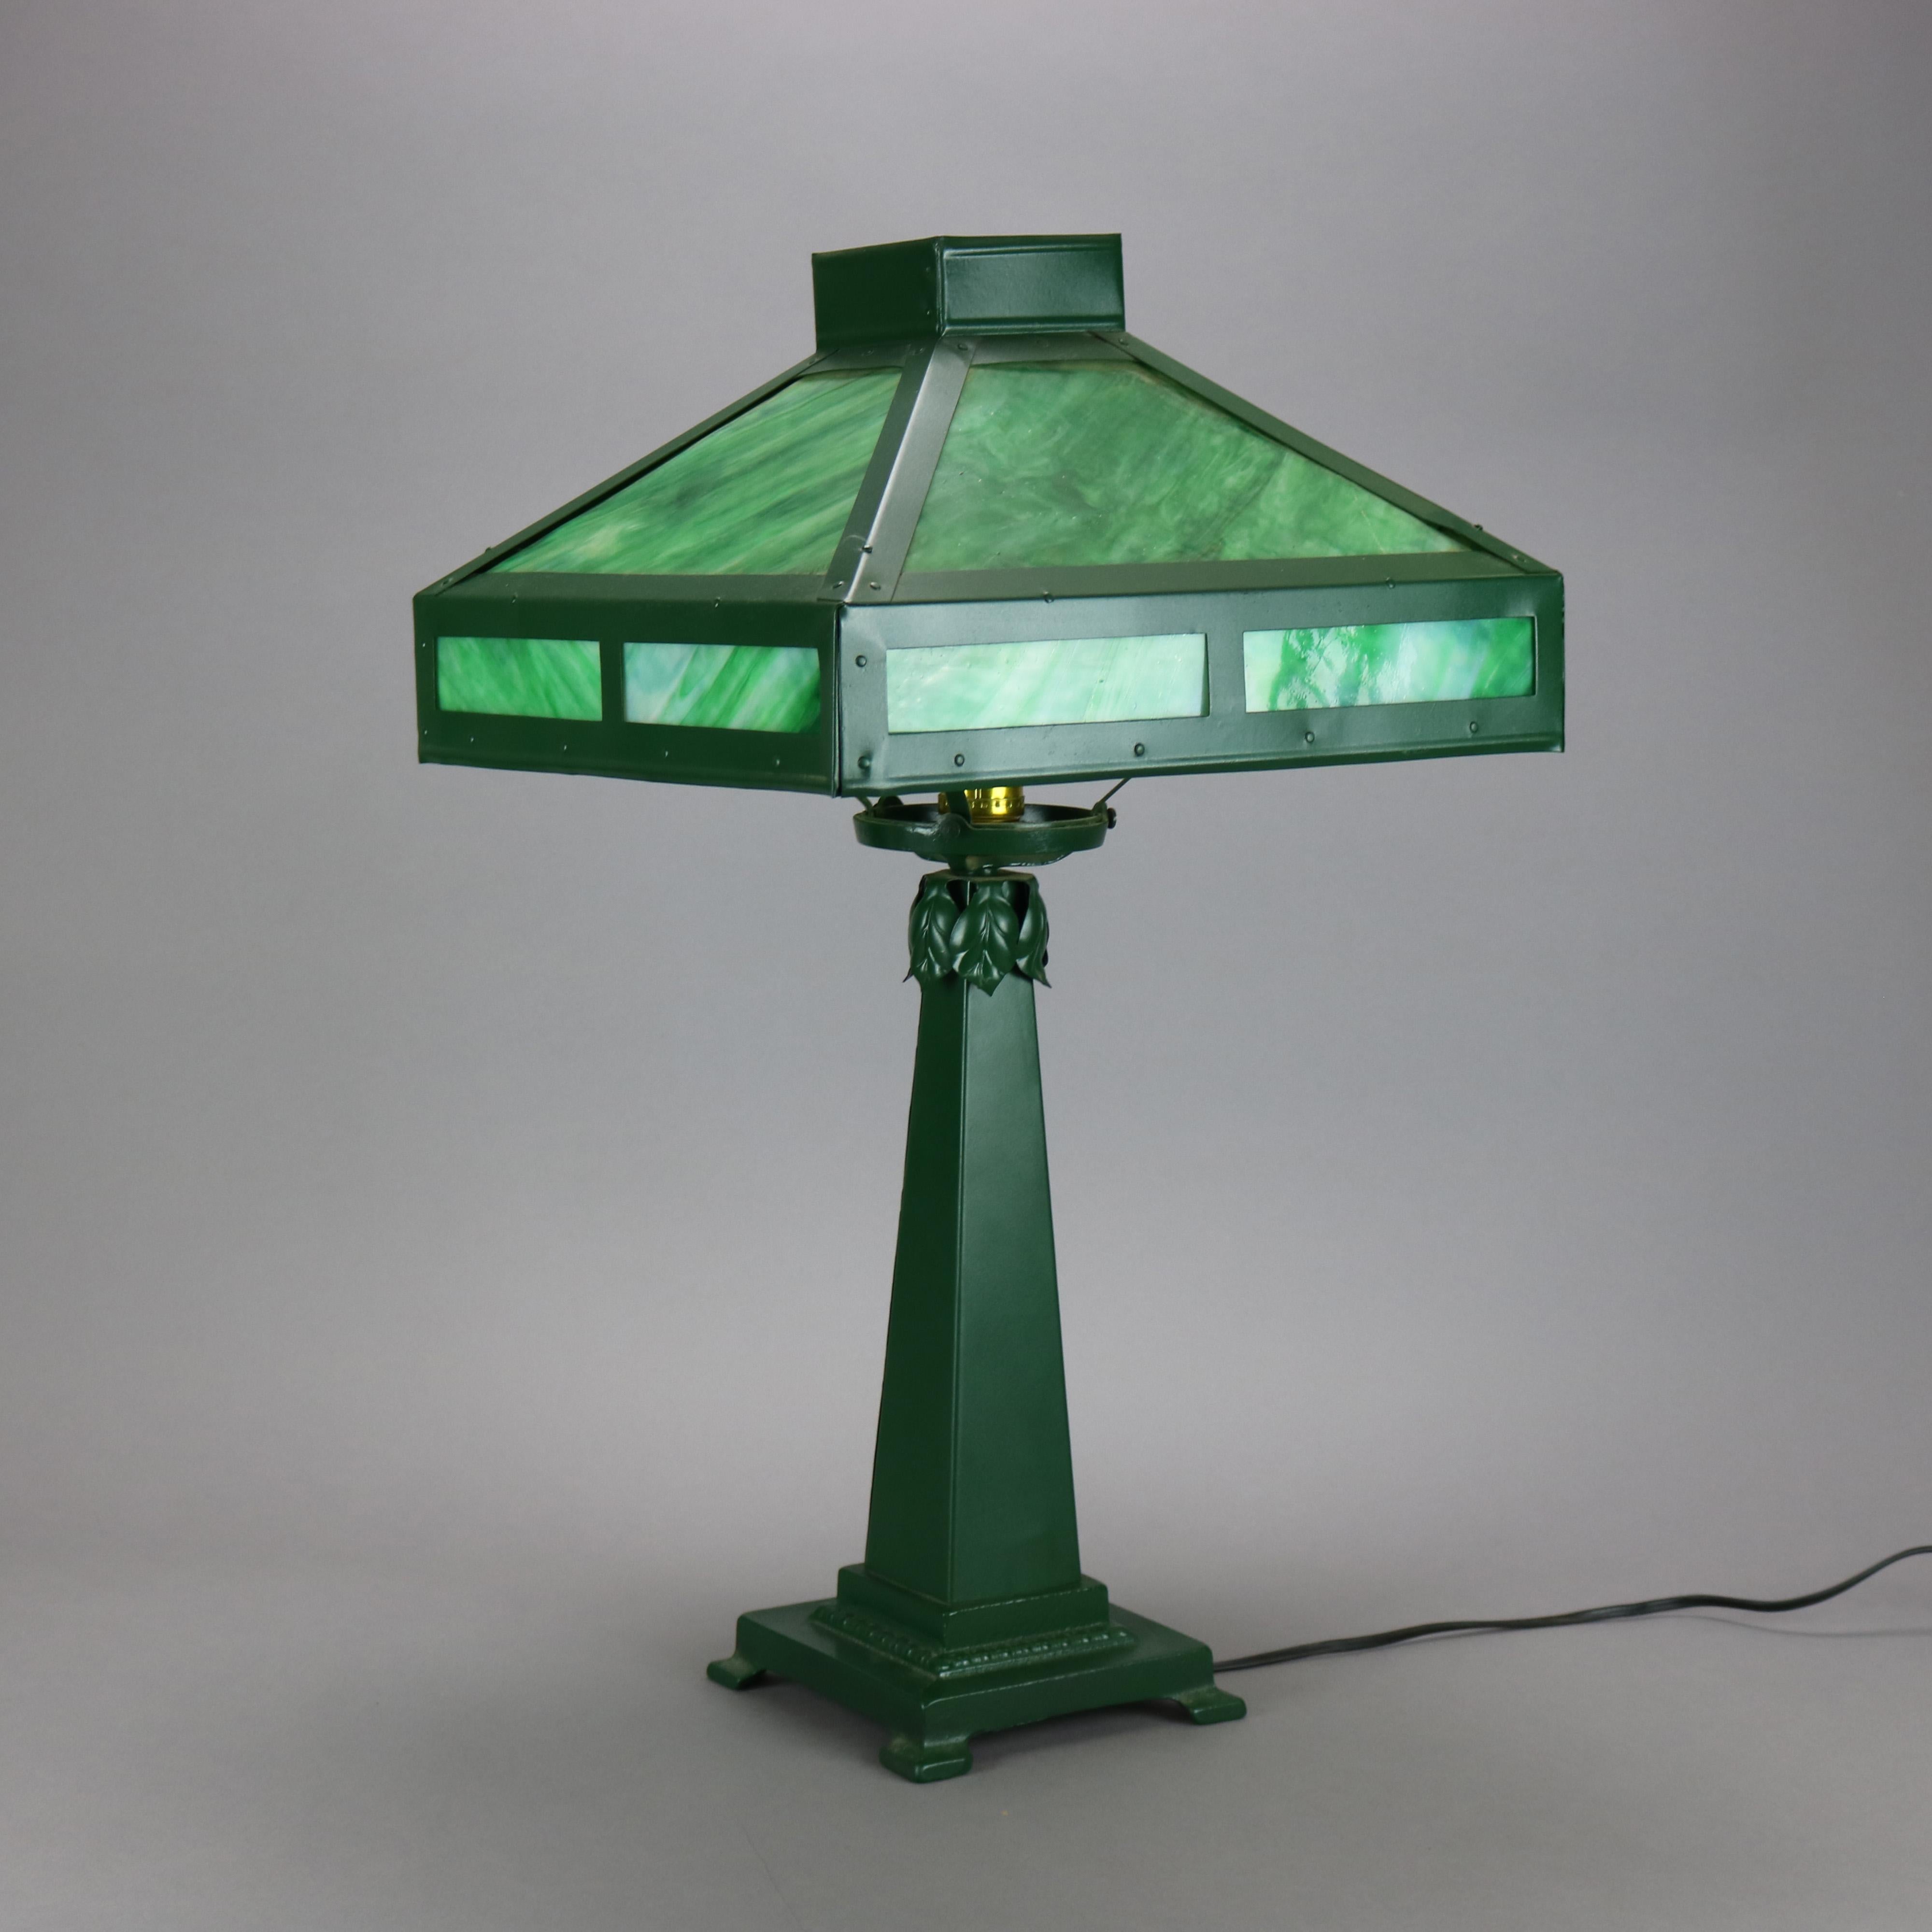 An antique Arts & Crafts Mission table lamp offers slag glass paneled shade over wrought metal single socket footed base, elements of Prairie School, c1920

Measures - 24''h x 13.5''w x 13.5''d.